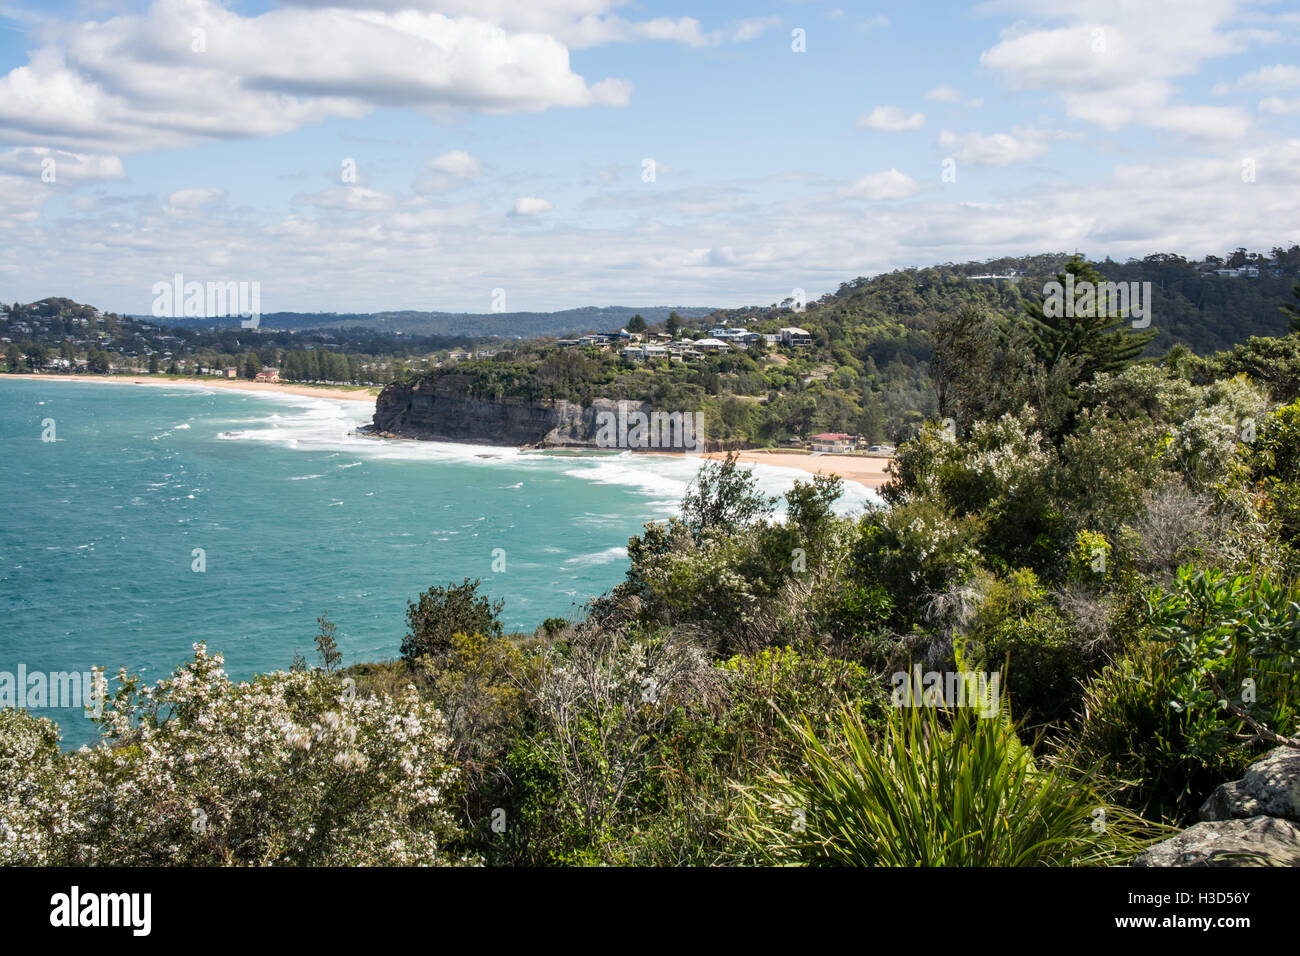 Looking South from North Bilgola Head with Bilgola Beach on the right and Newport Beach in middle distance. Stock Photo